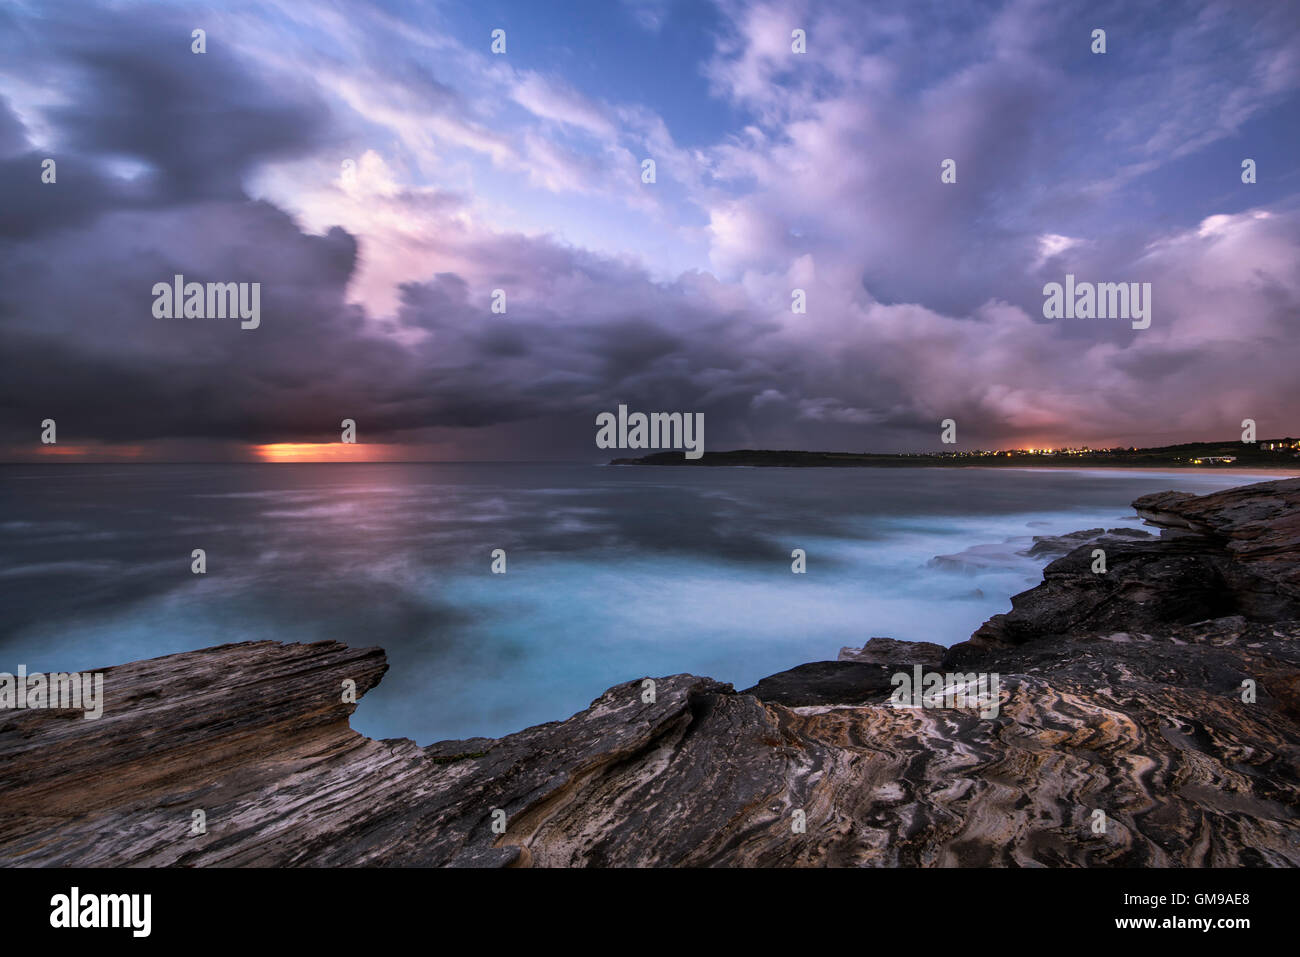 Australia, New South Wales, Maroubra, beach in the evening Stock Photo